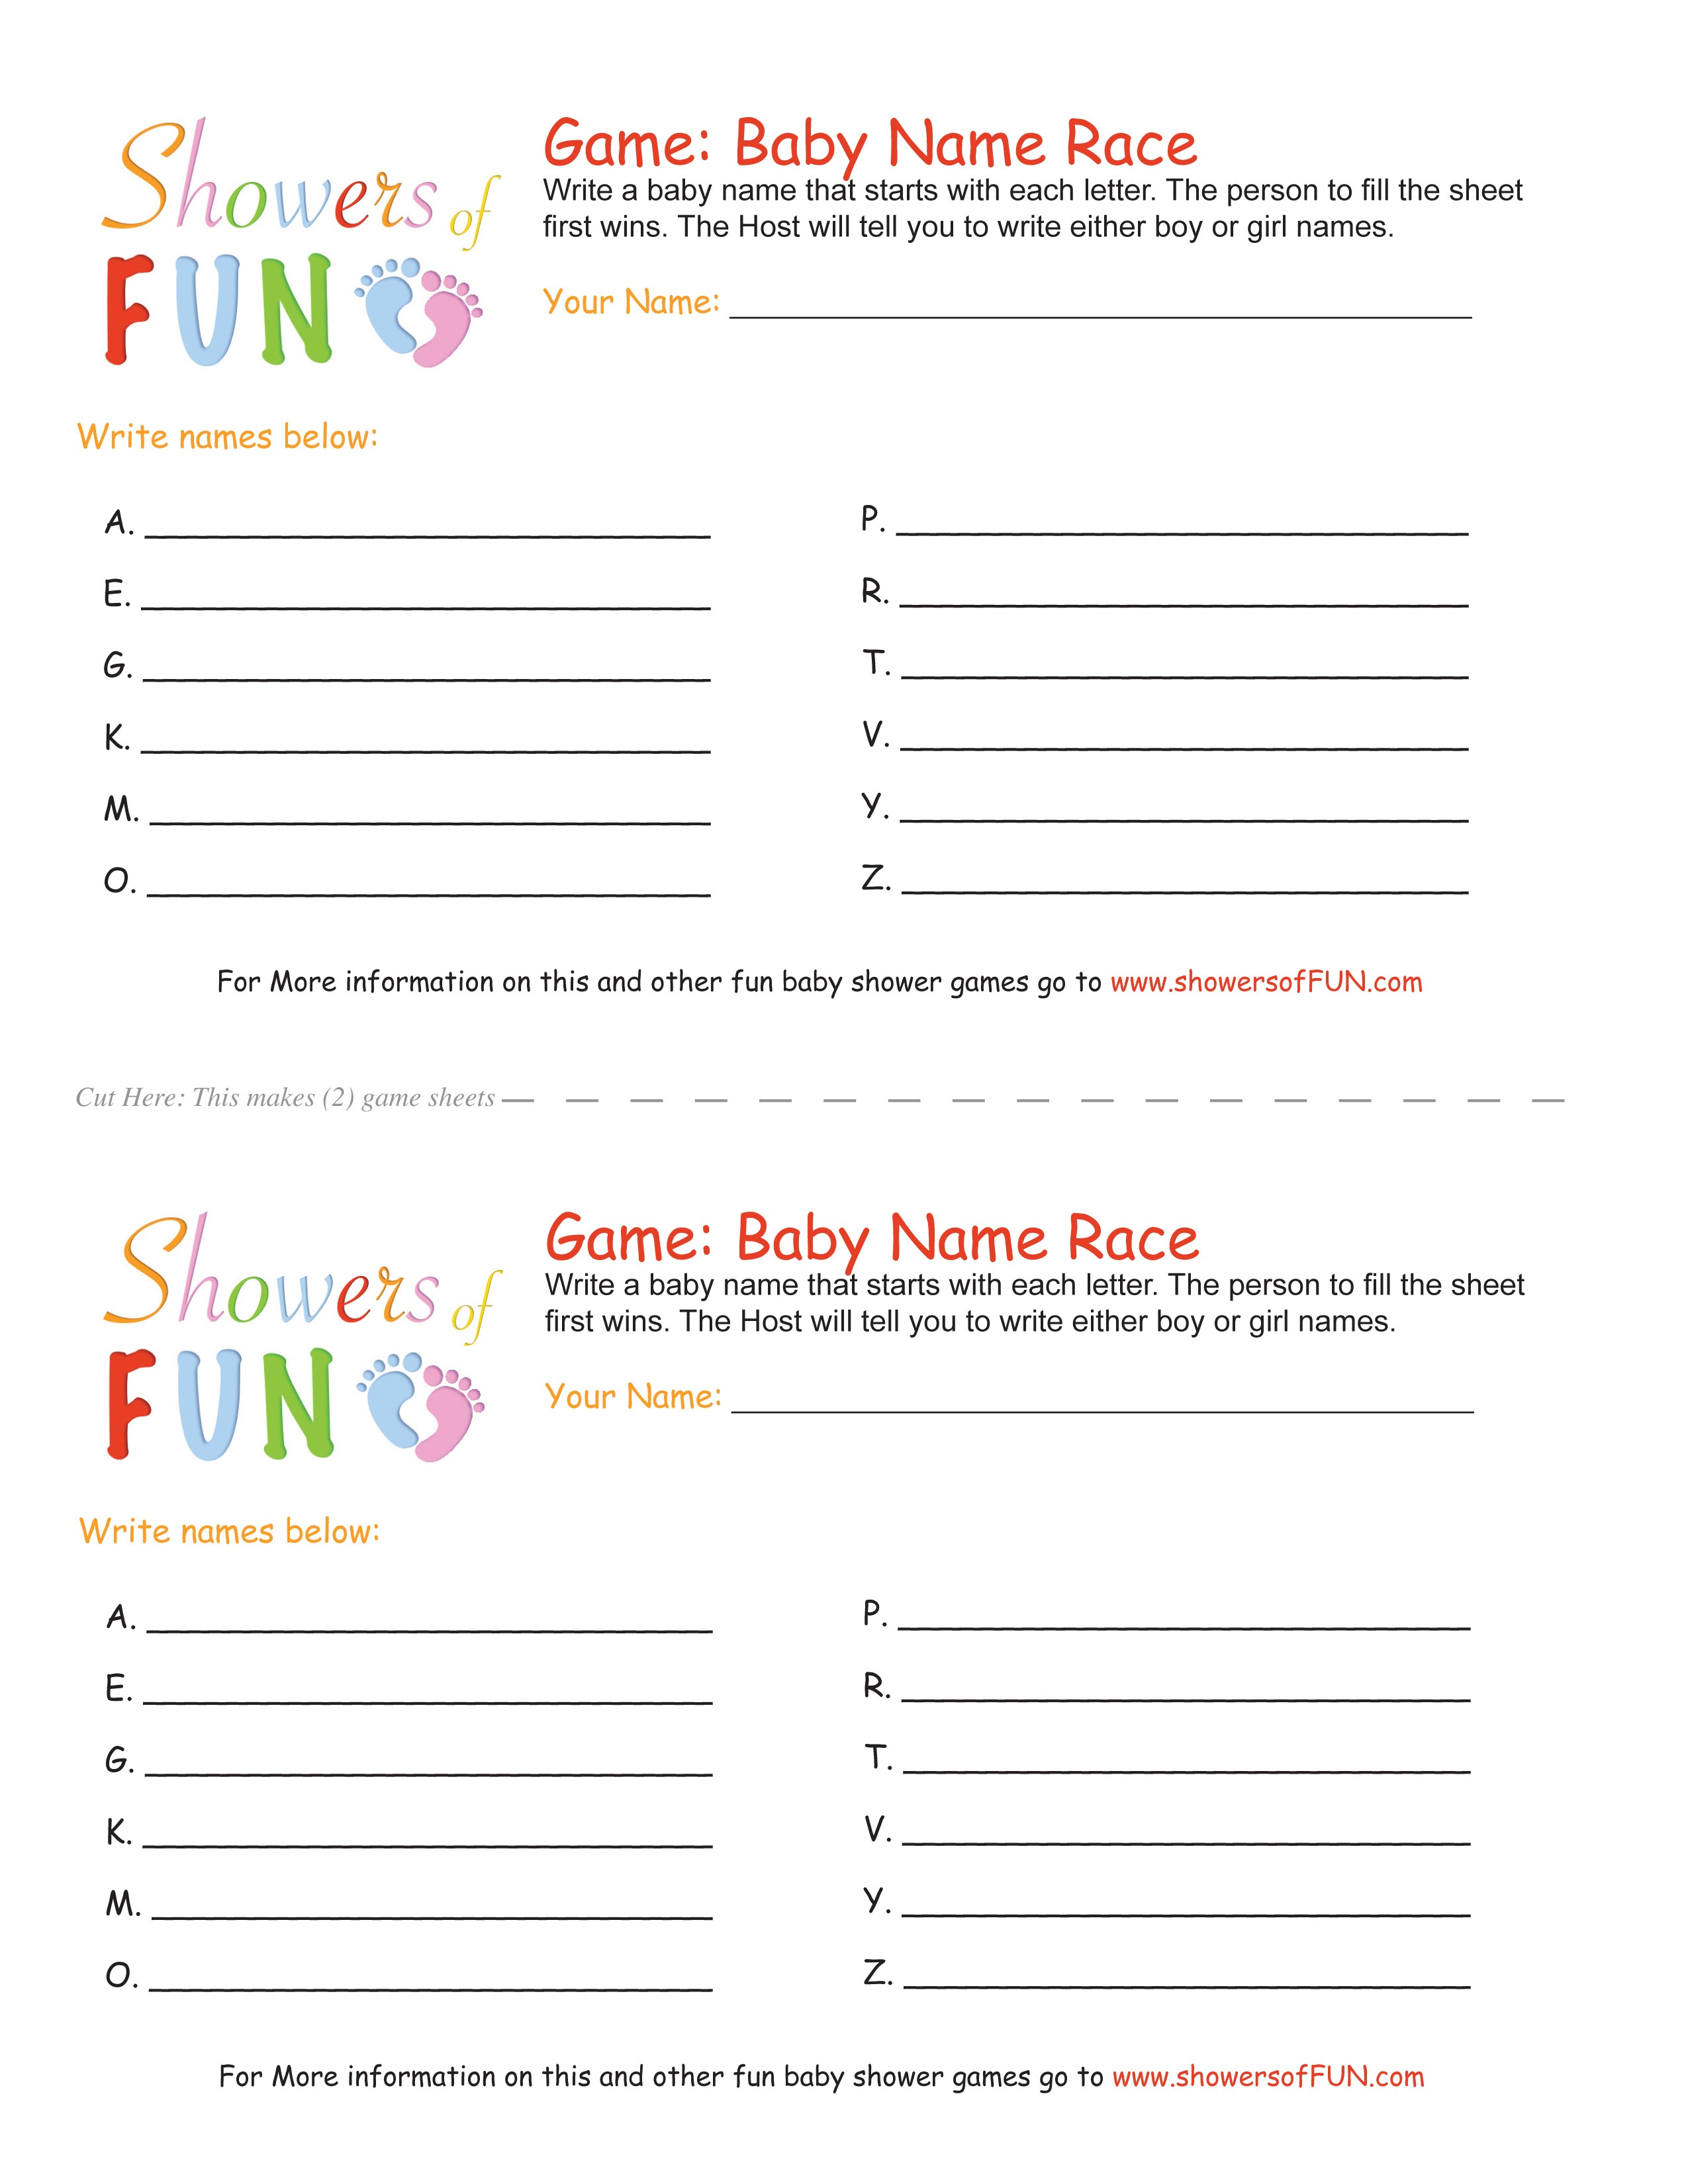 The Baby Name Race Baby Shower Game - Baby Name Race Free Printable